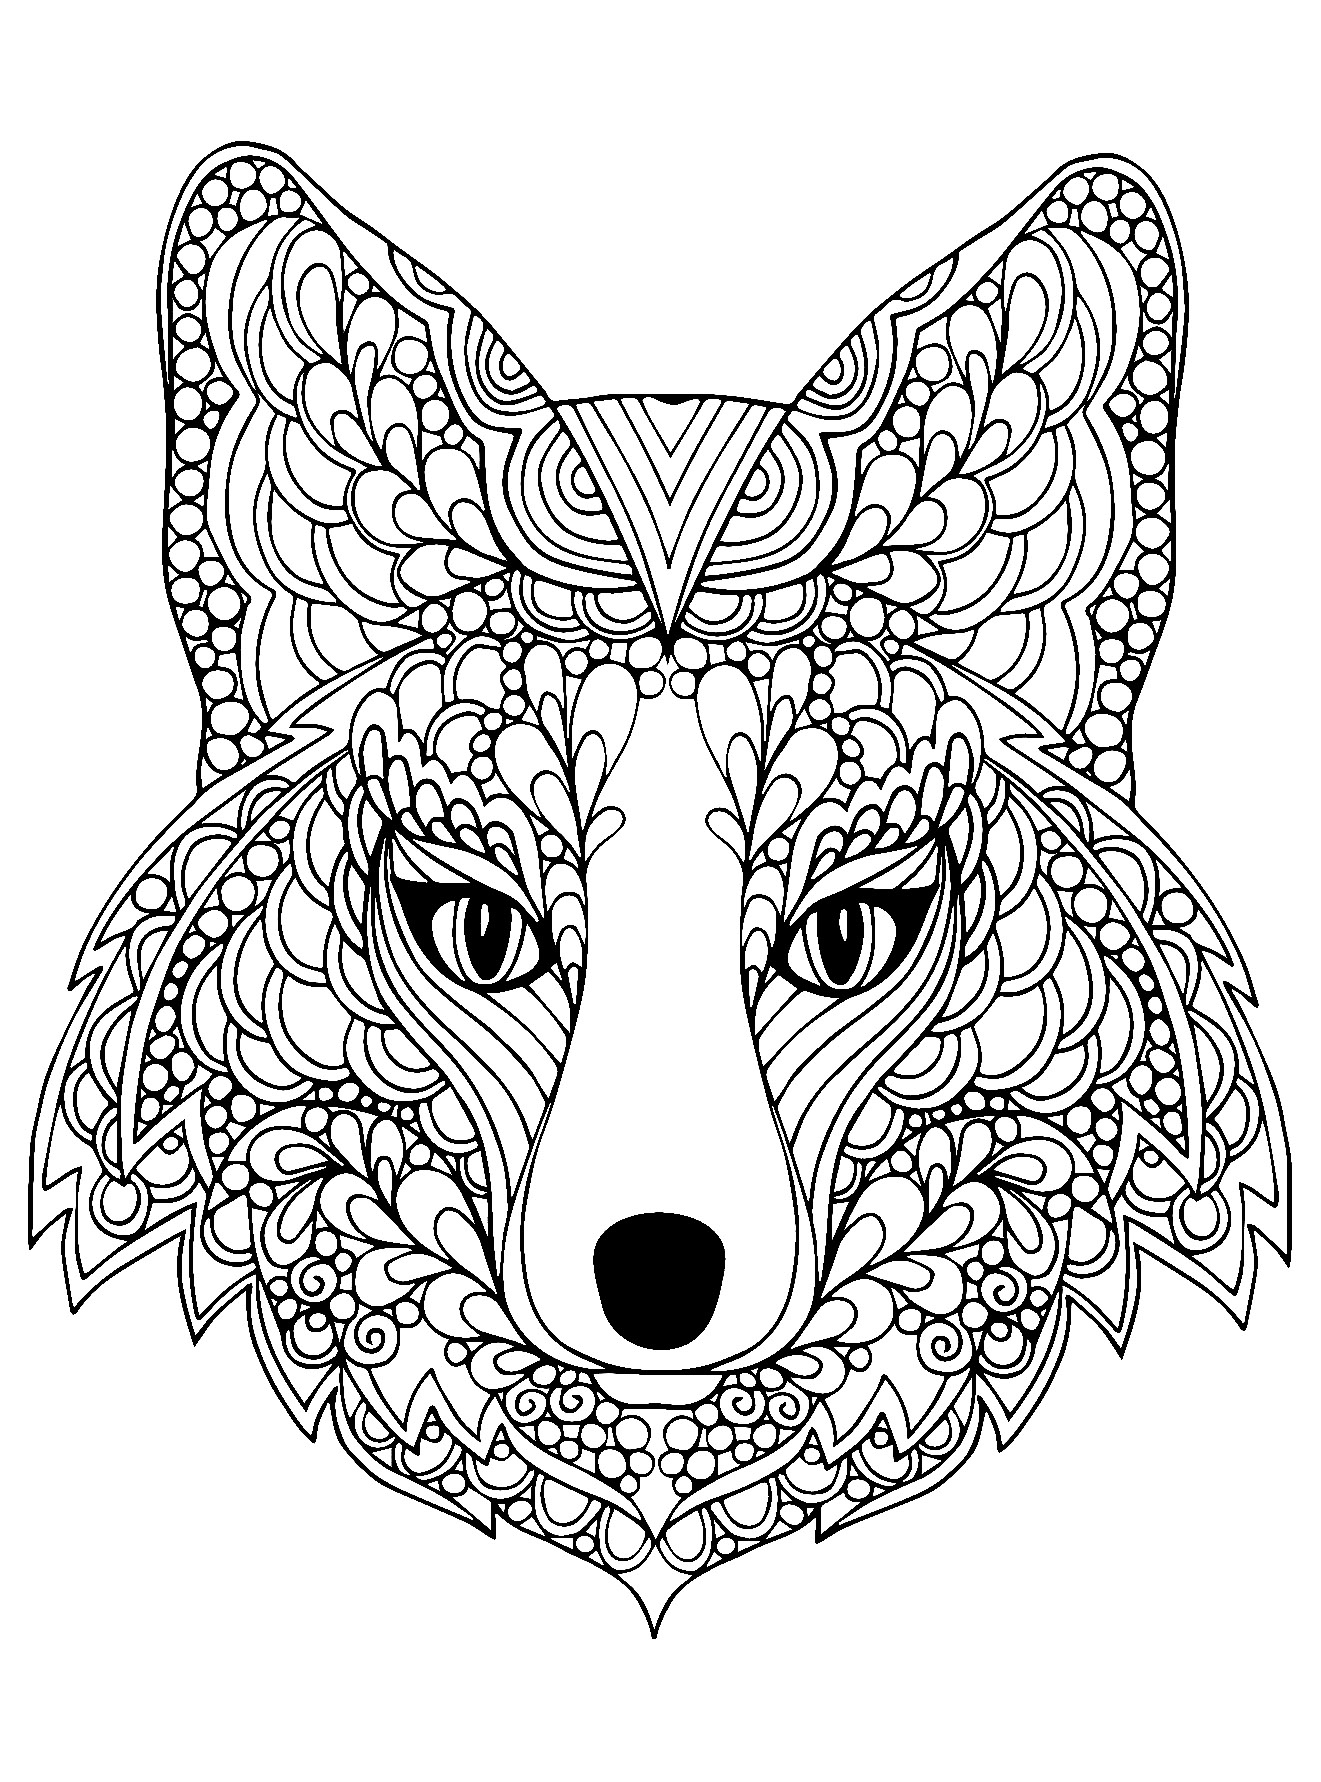 fox-to-download-fox-kids-coloring-pages